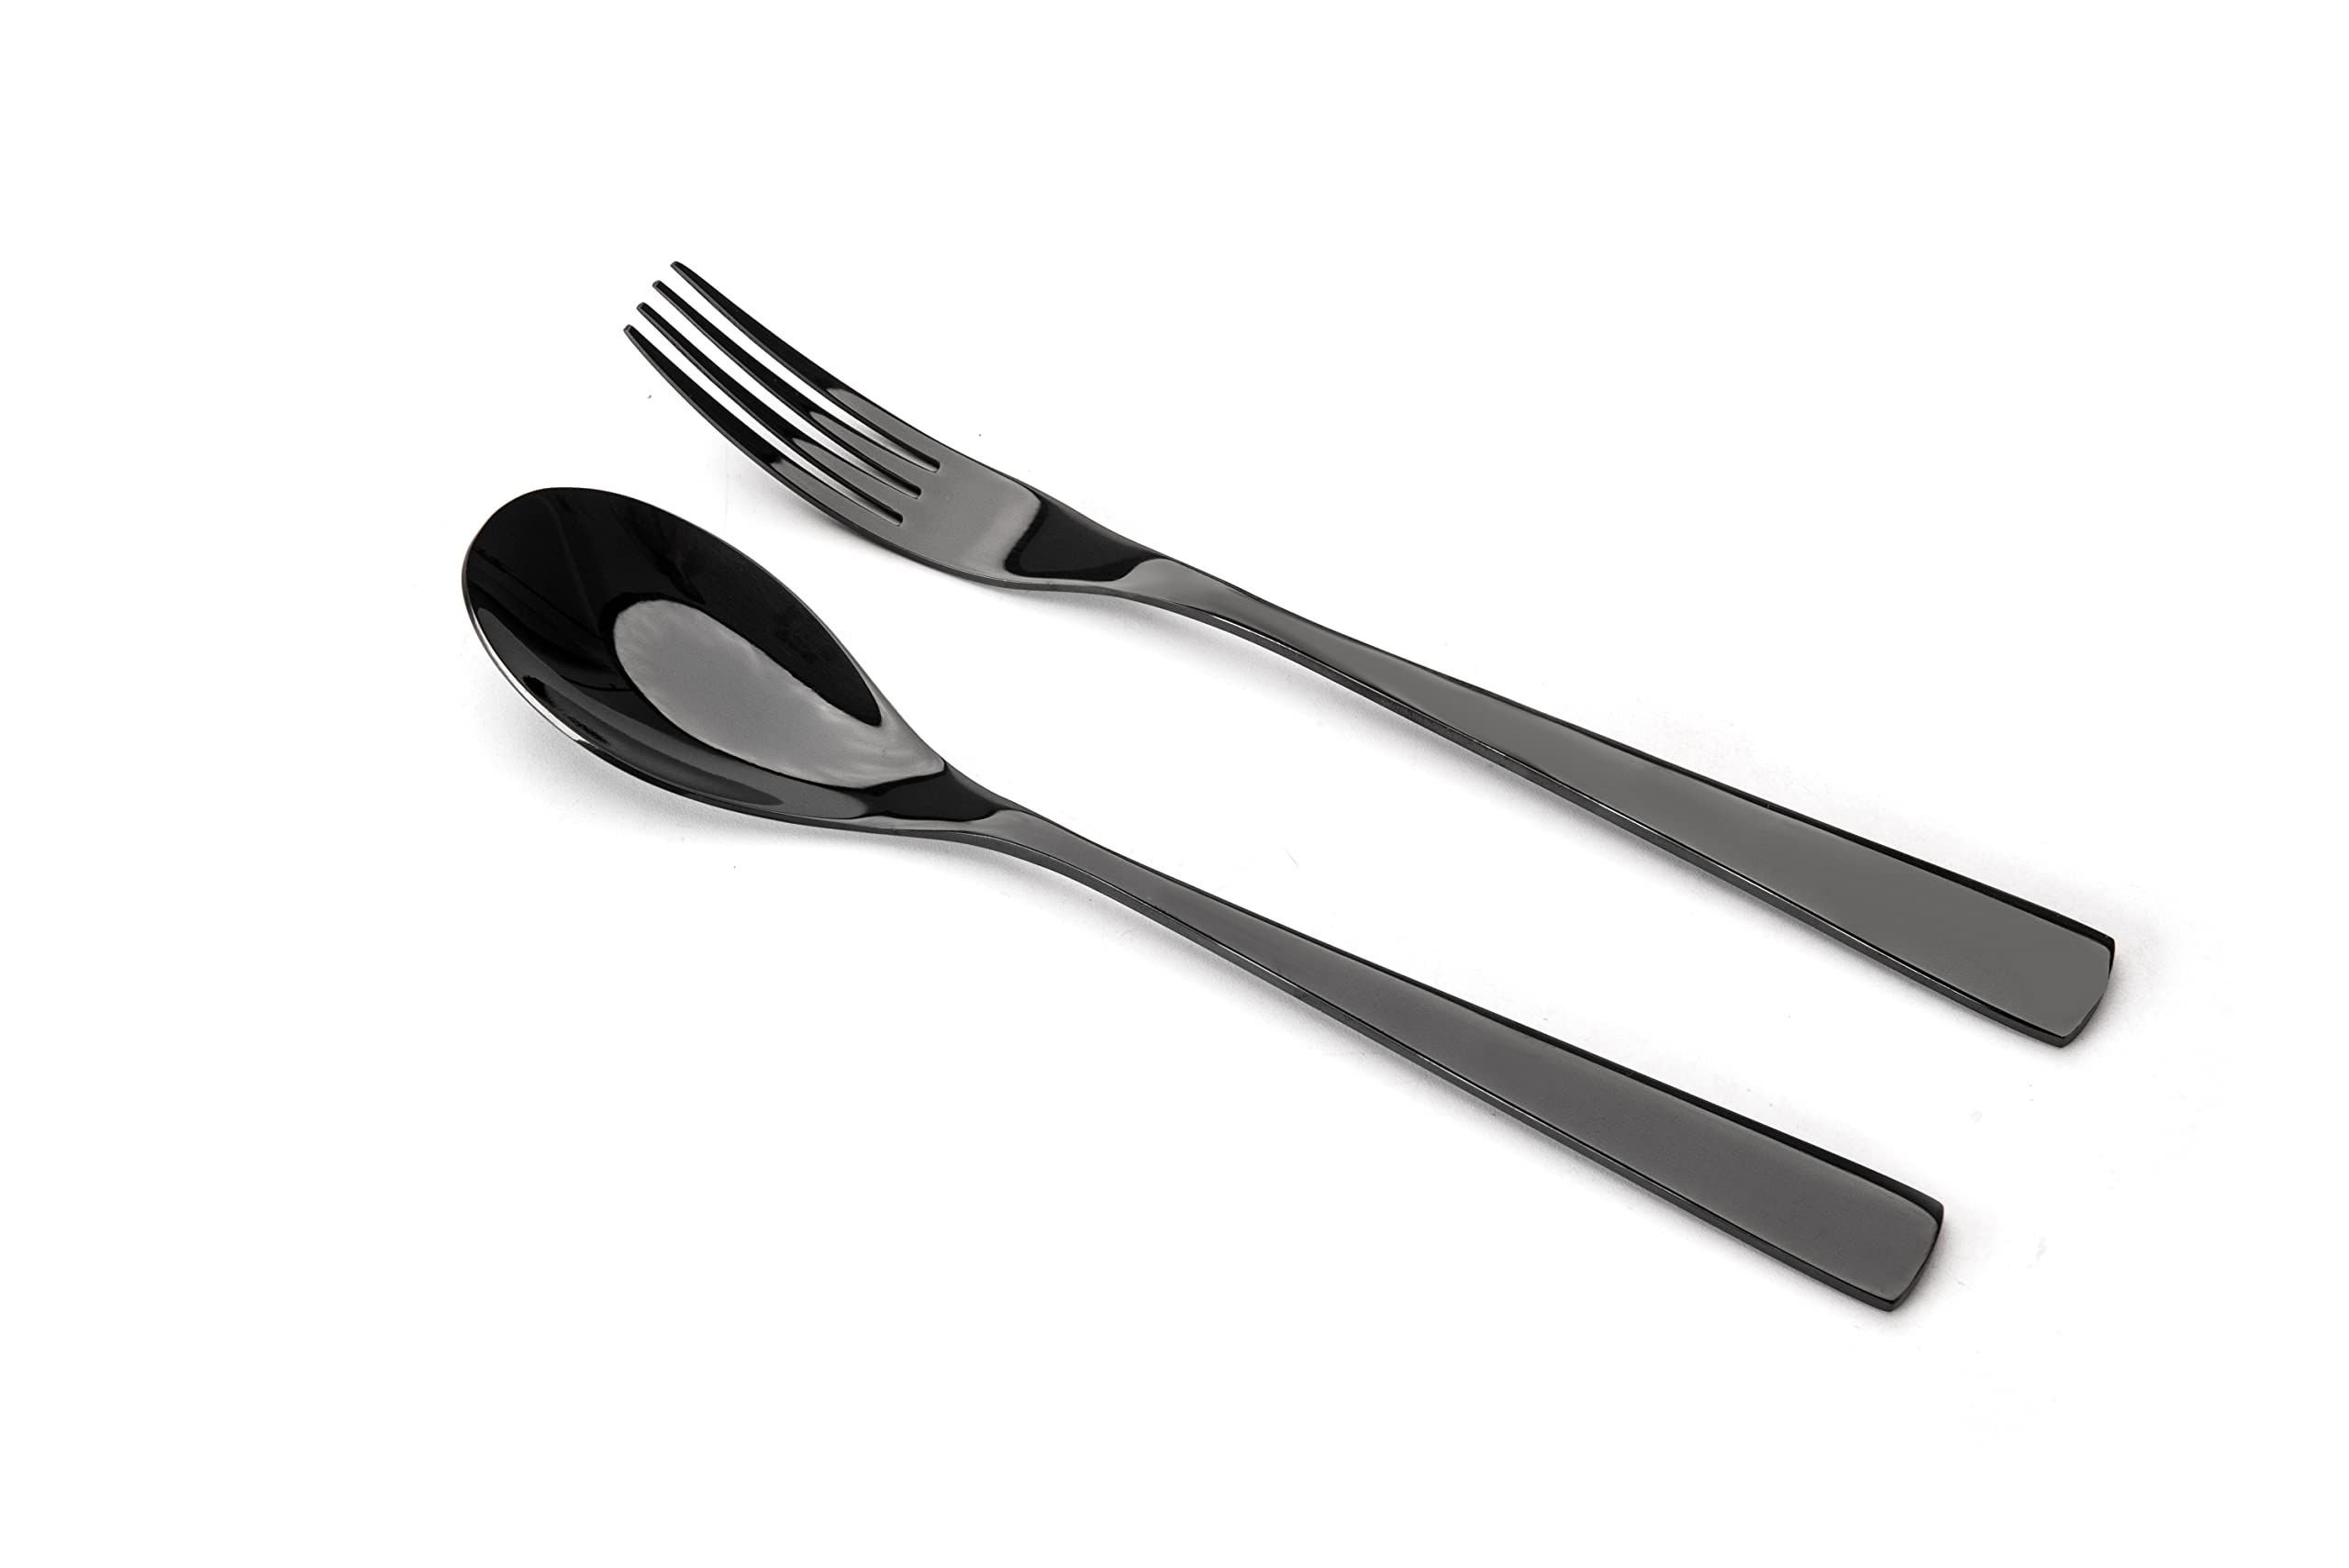 Black Cutlery Set with Knife, Fork Spoon, Stainless Steel Cutlery for Family/Party/Hotel/Restaurant, Mirror Polished & Dishwasher Safe